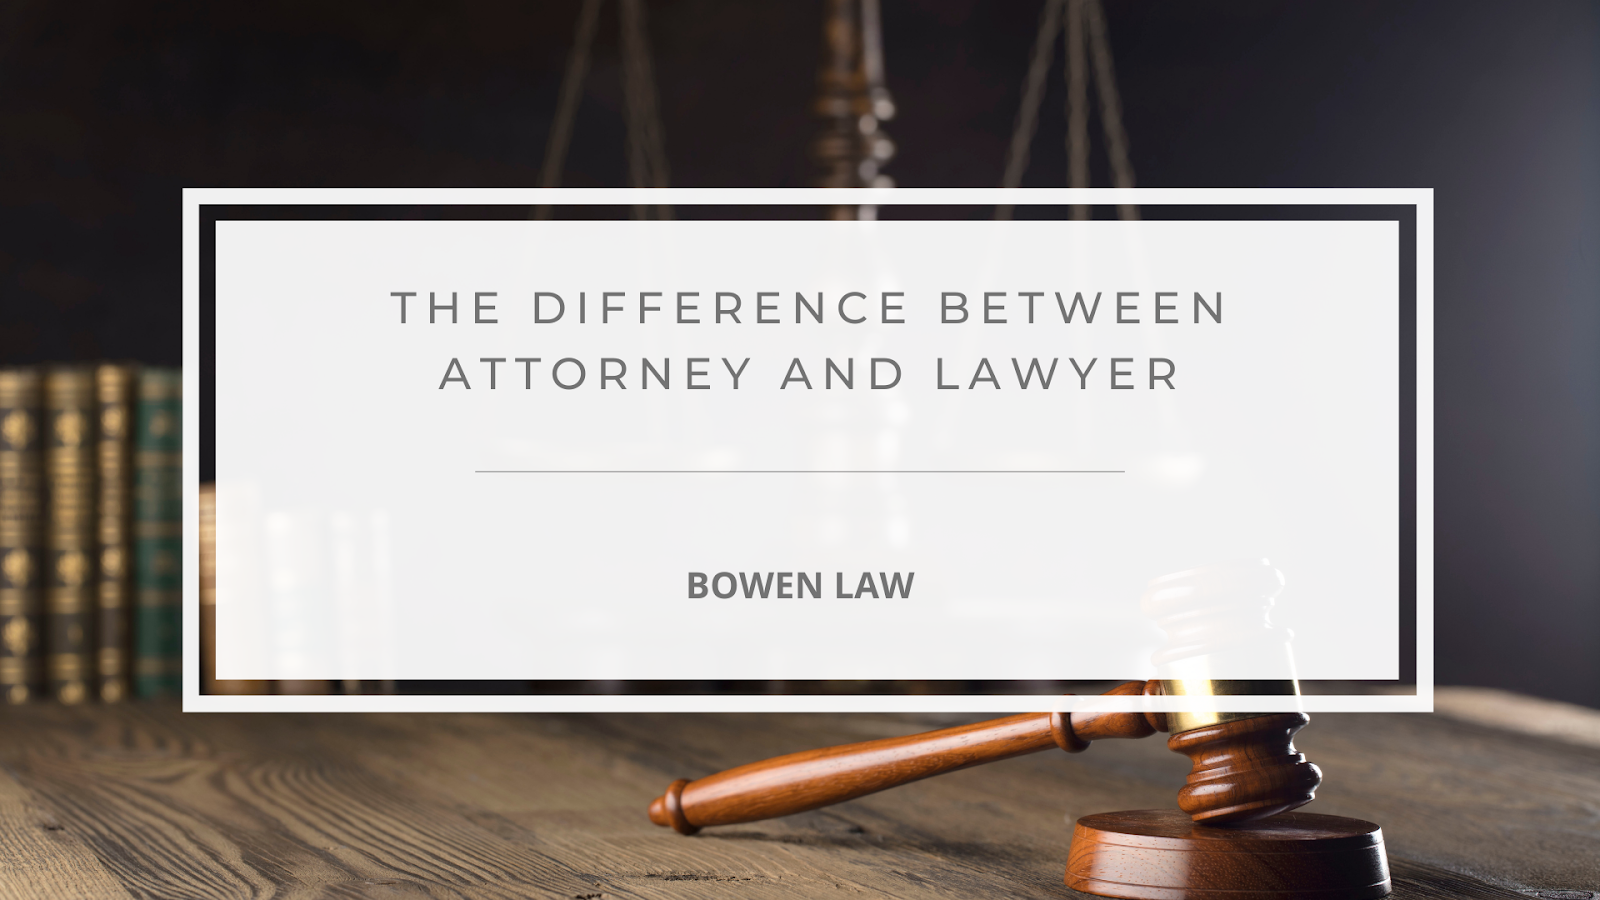 Featured image of the difference between attorney and lawyer